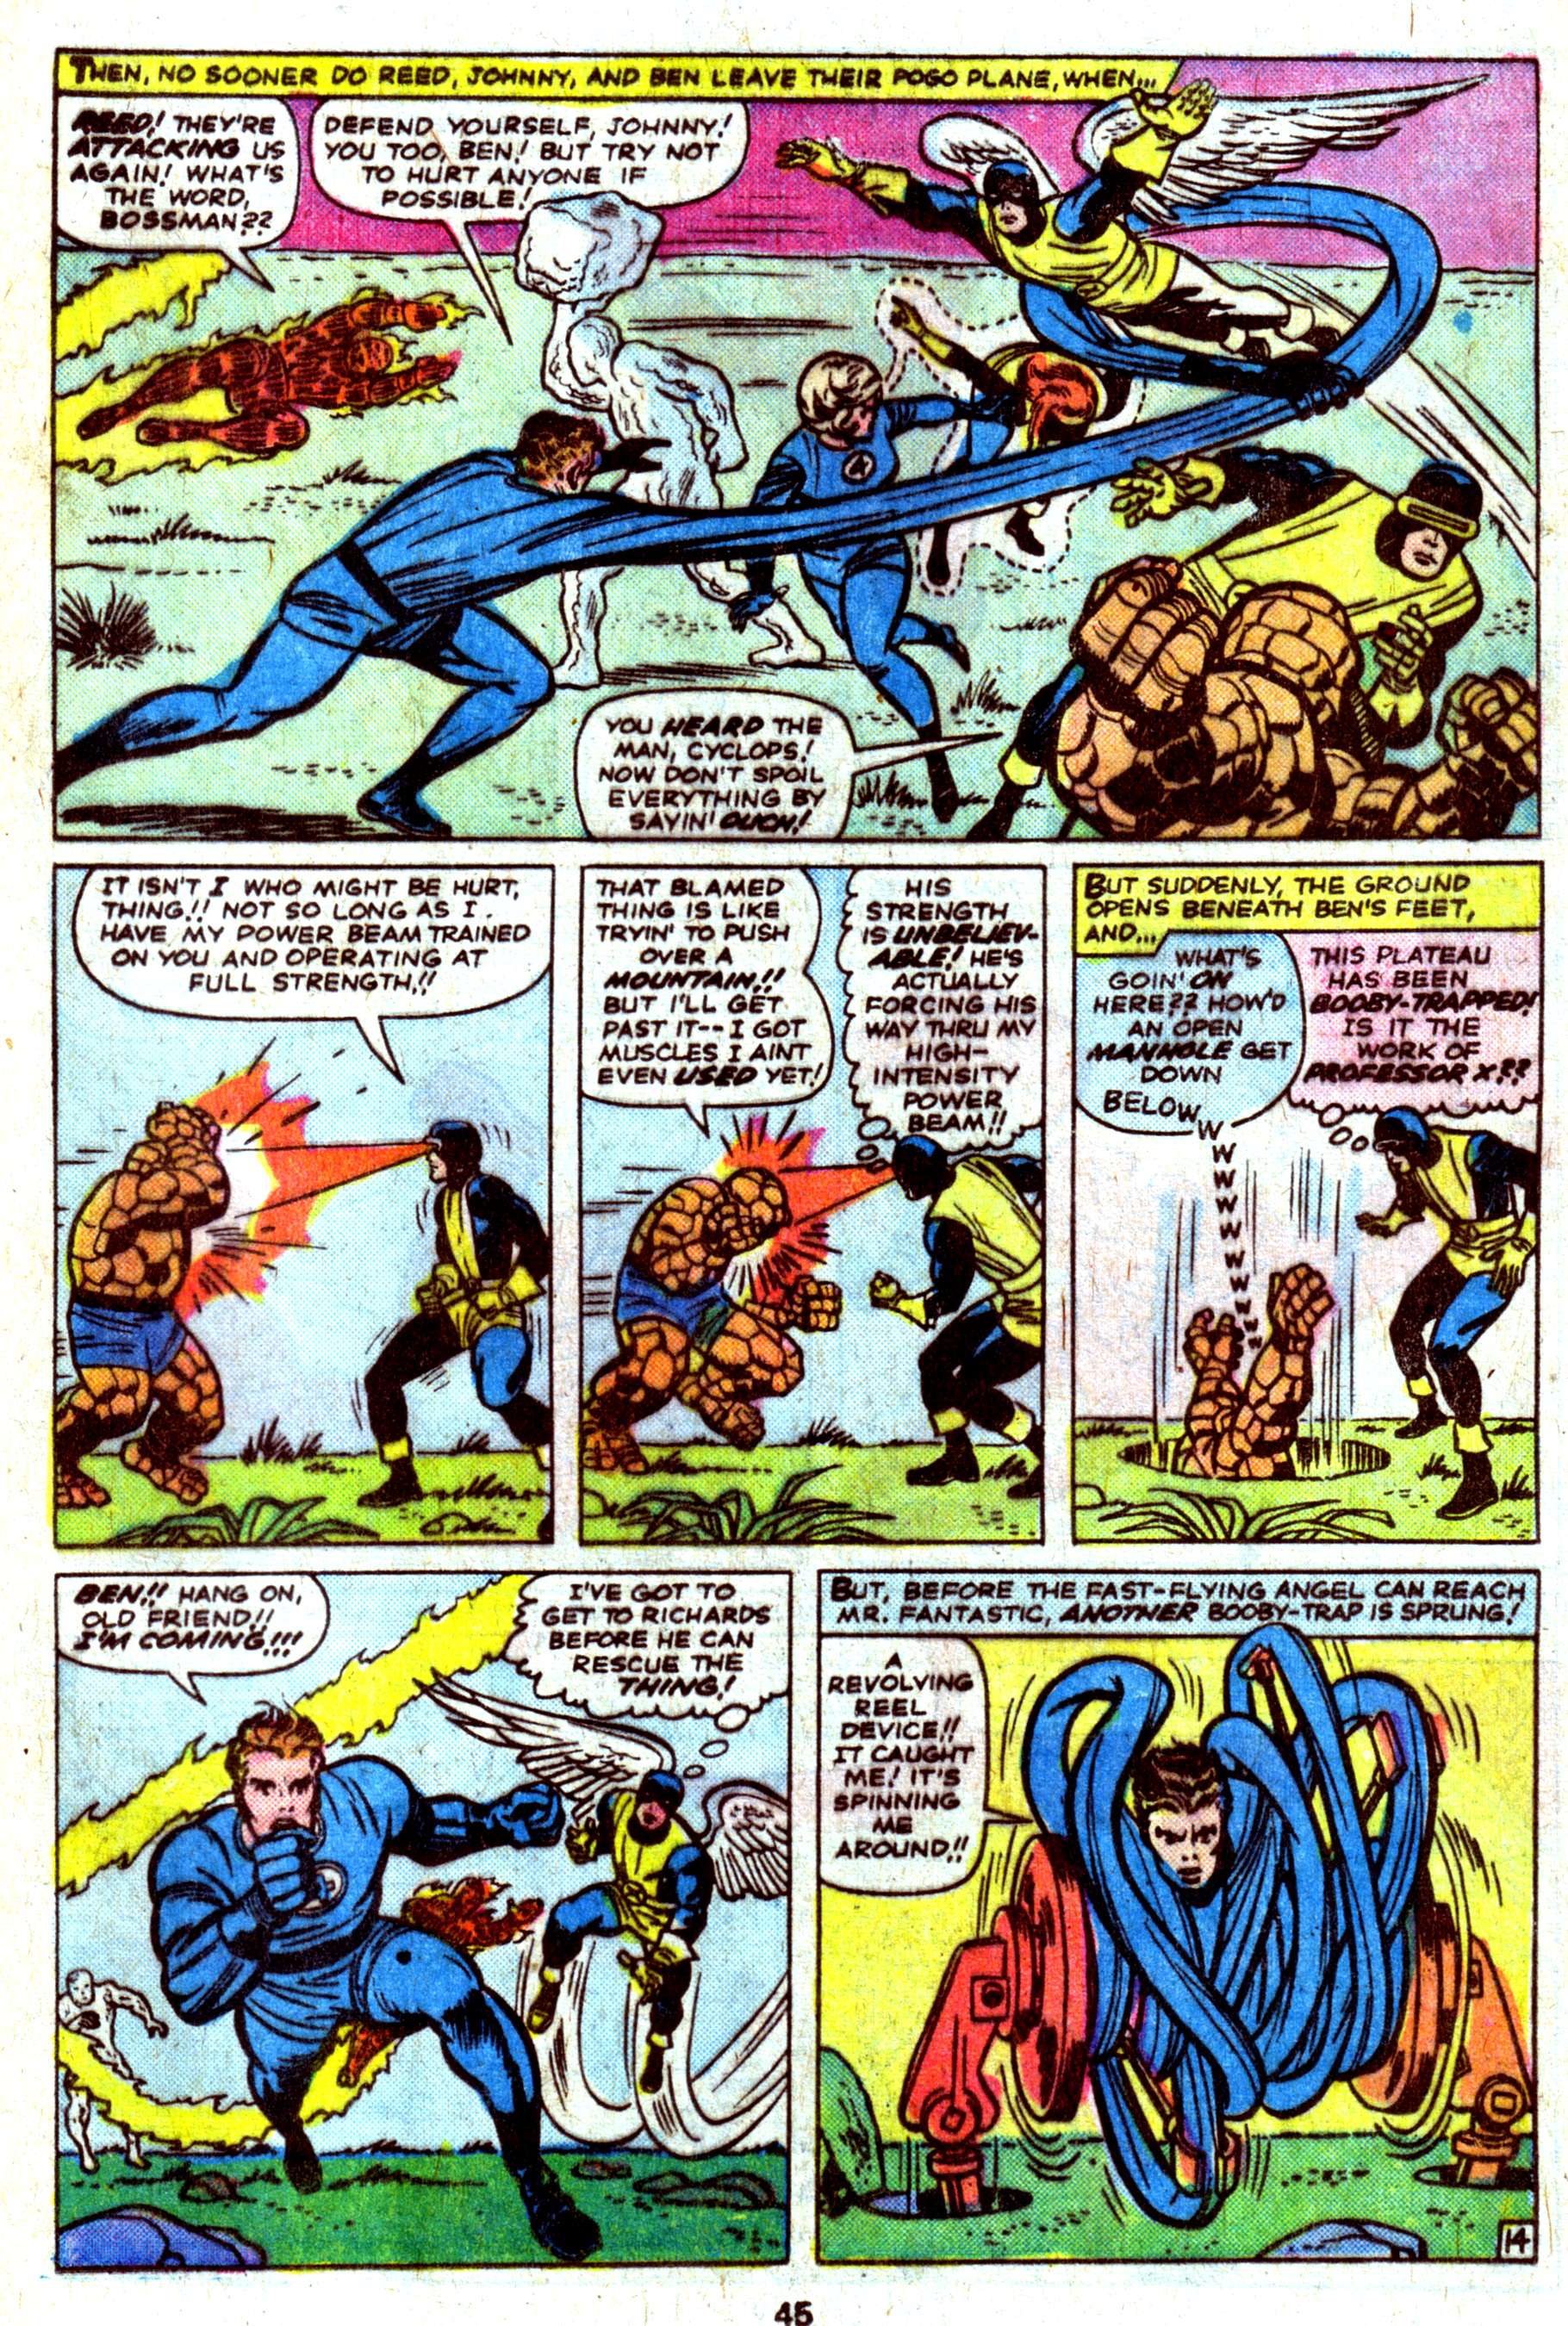 Read online Giant-Size Fantastic Four comic -  Issue #4 - 47